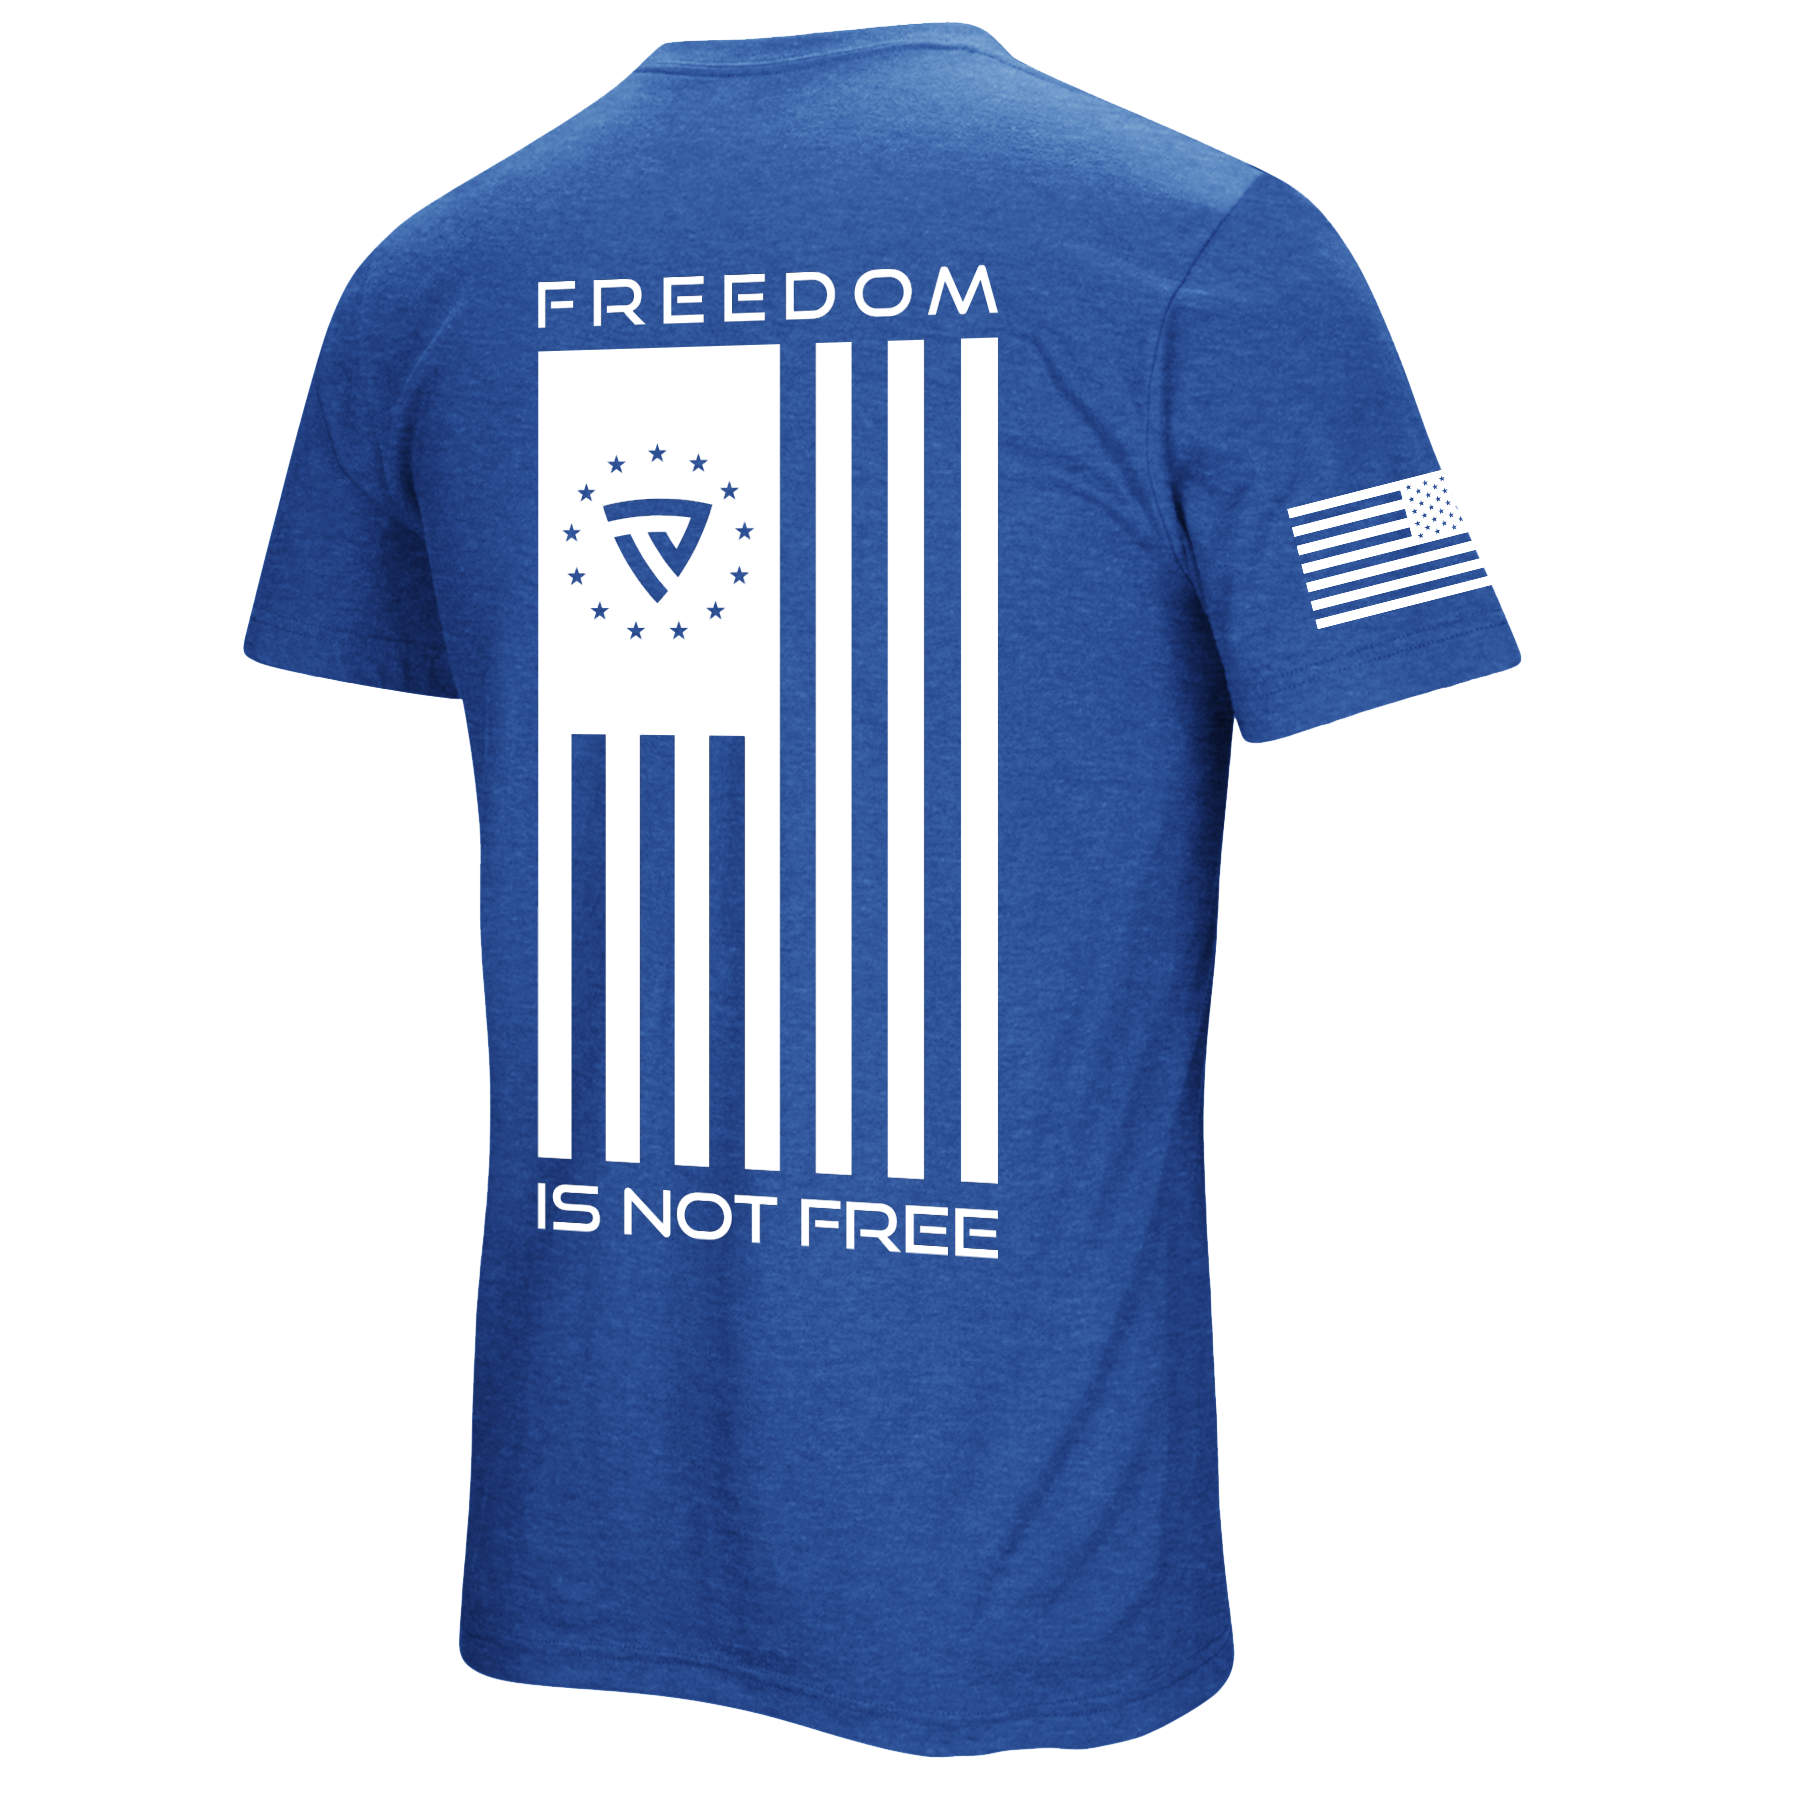 Men's Freedom Is Not Free X PS20 Tee